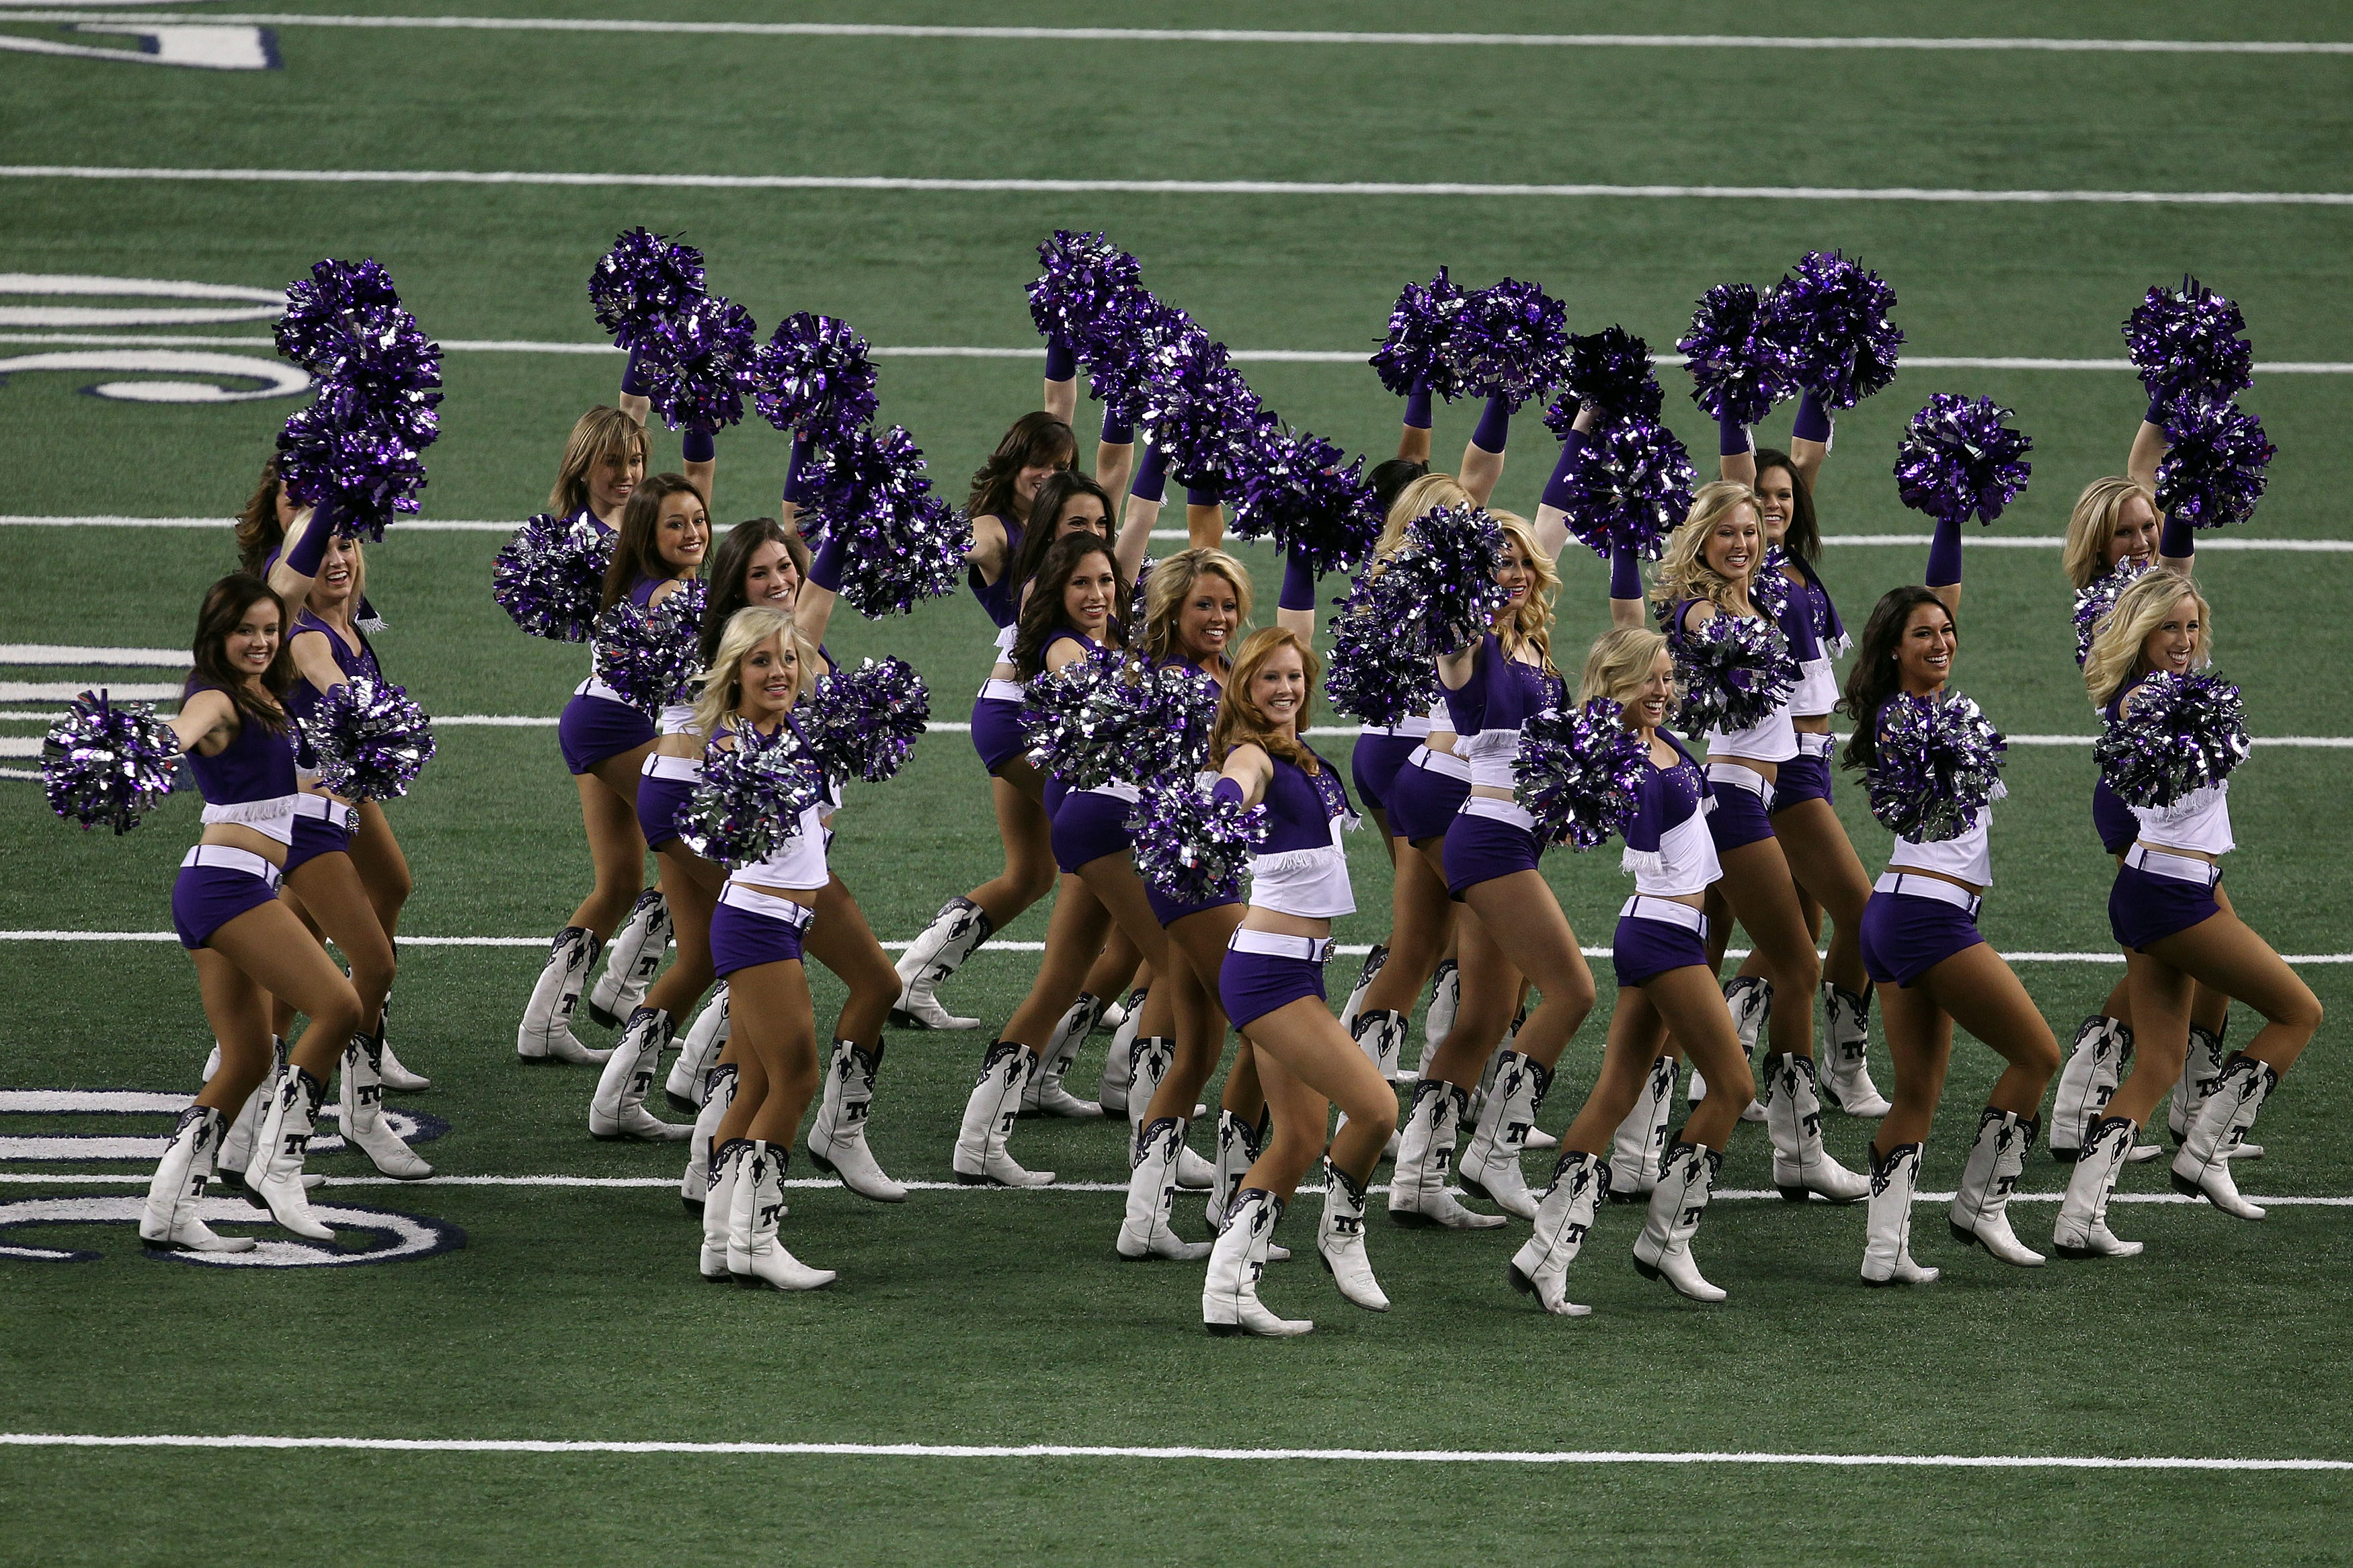 ARLINGTON, TX - FEBRUARY 06:  TCU cheerleaders perform before the Green Bay Packers play against the Pittsburgh Steelers in Super Bowl XLV at Cowboys Stadium on February 6, 2011 in Arlington, Texas.  (Photo by Jonathan Daniel/Getty Images)